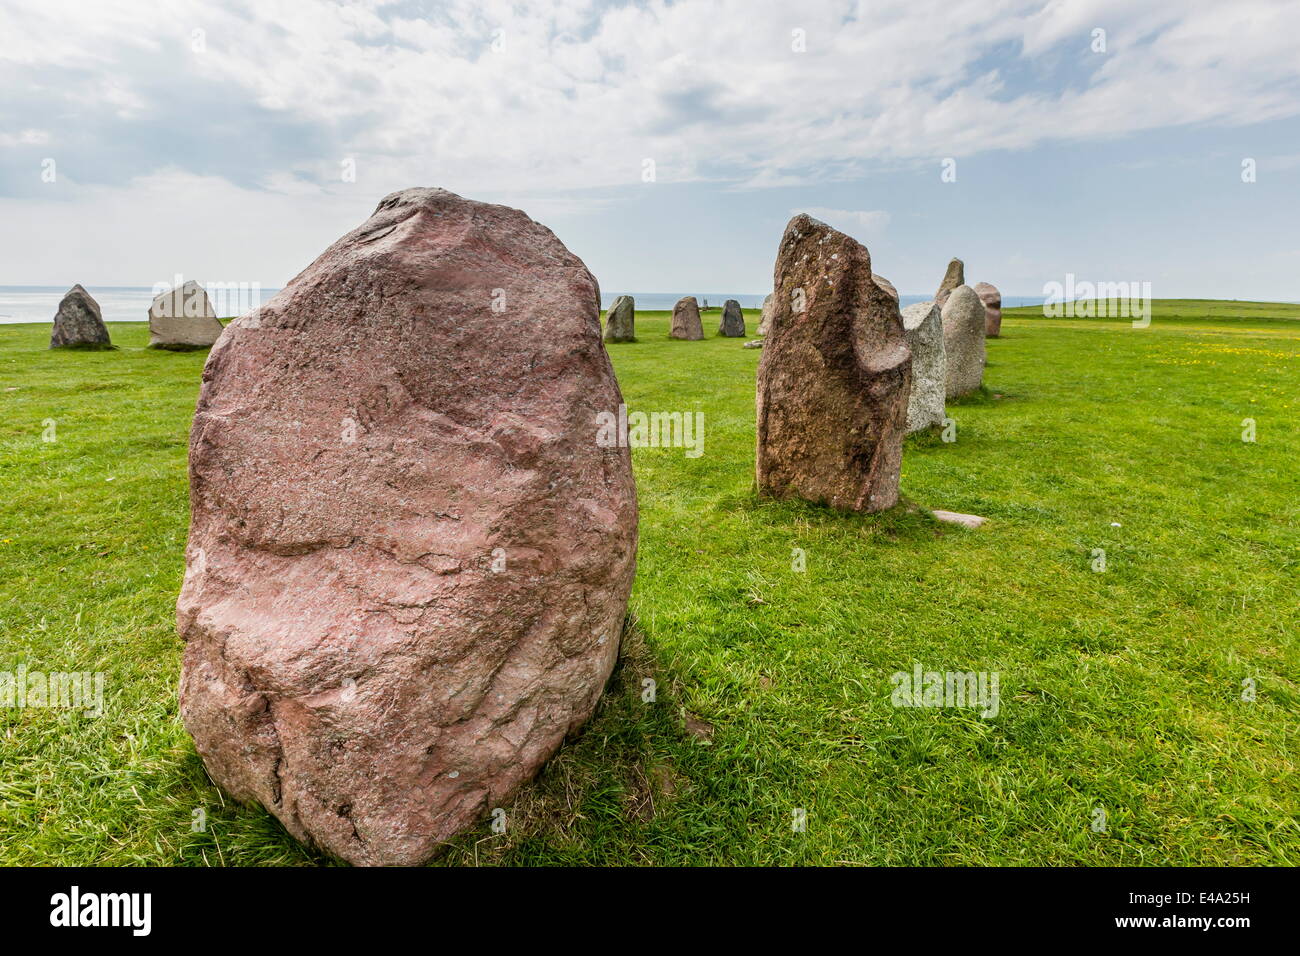 The standing stones in a shape of a ship known as Als Stene (Aleos Stones) (Ale's Stones), Baltic Sea, southern Sweden Stock Photo